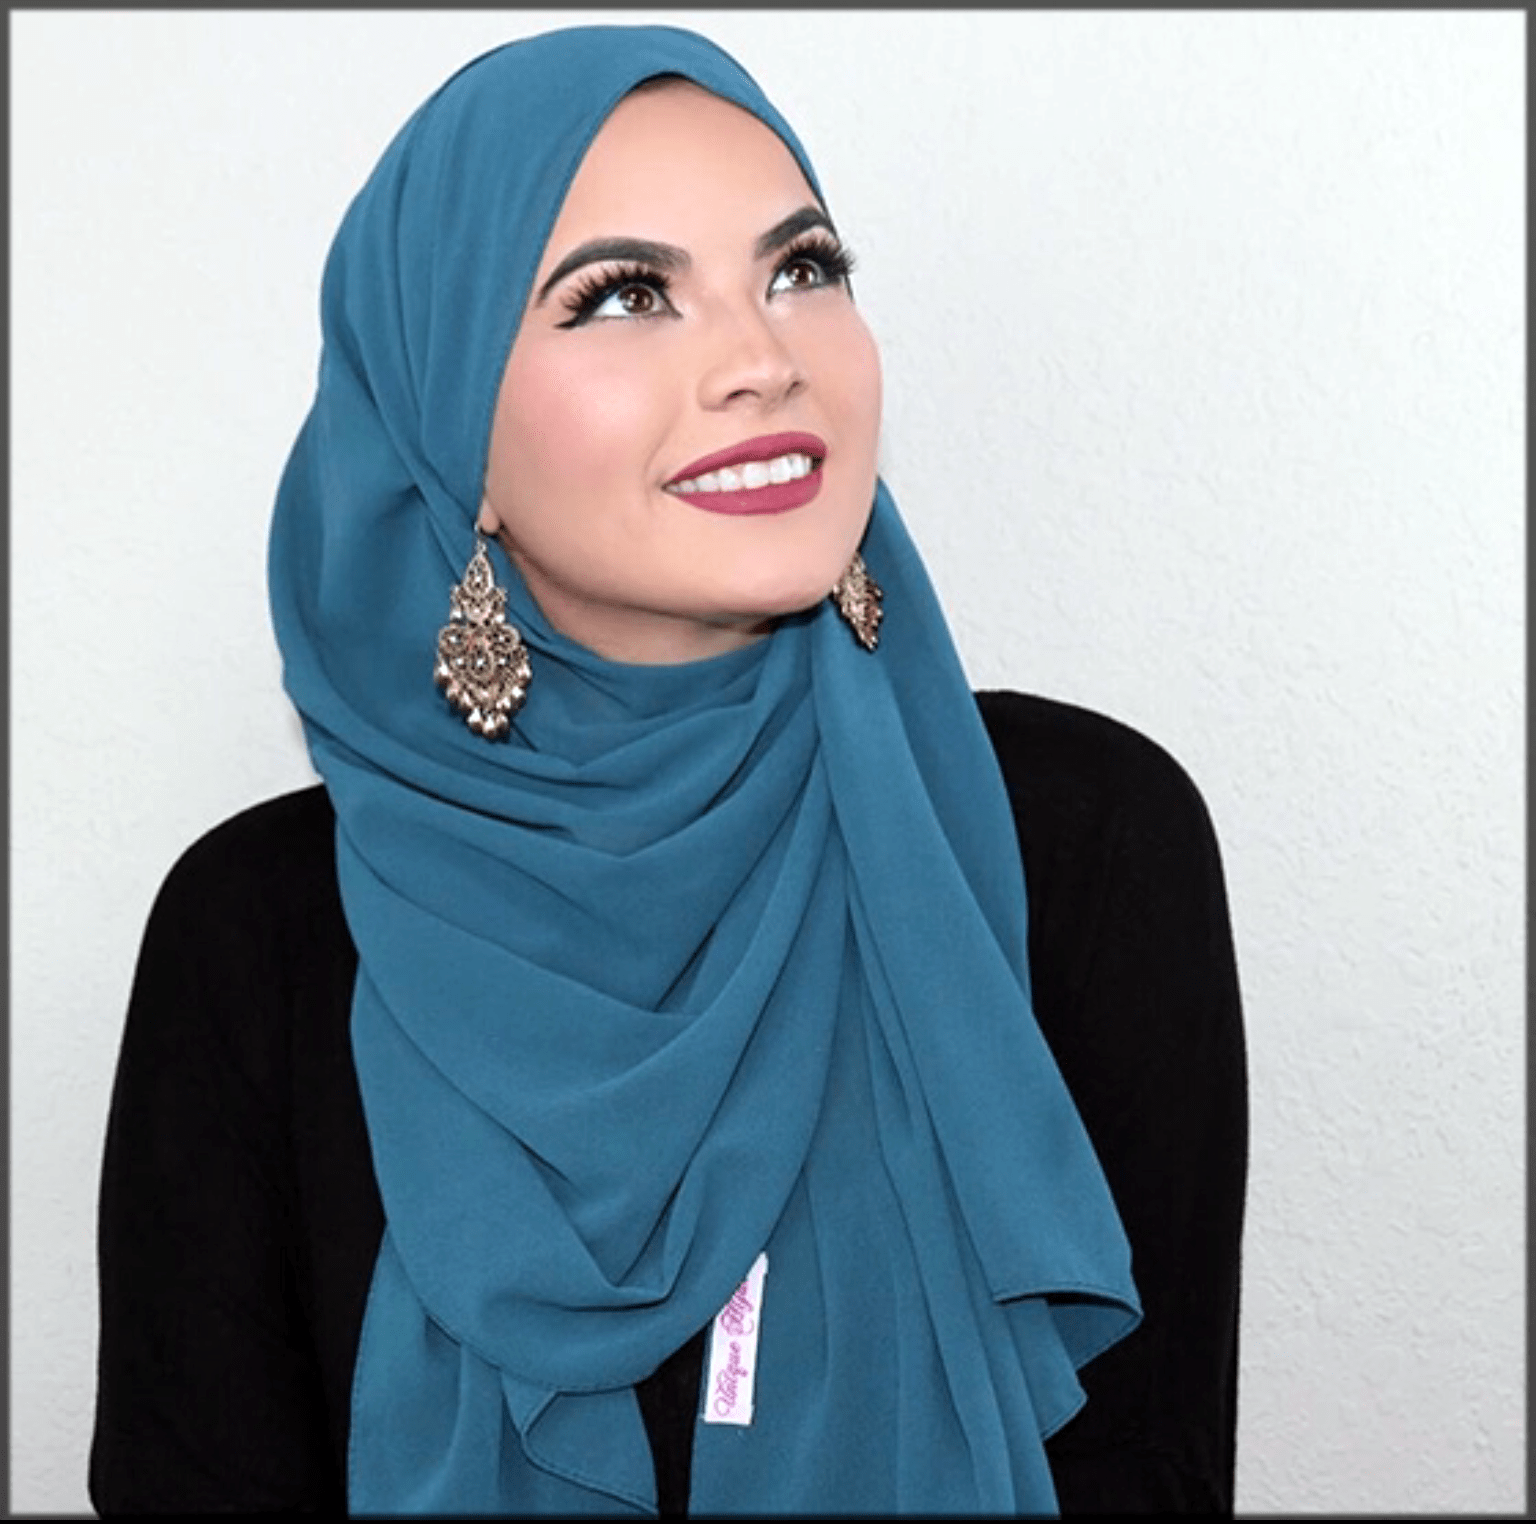 How To Wear Hijab Styles Videos Hijab Style